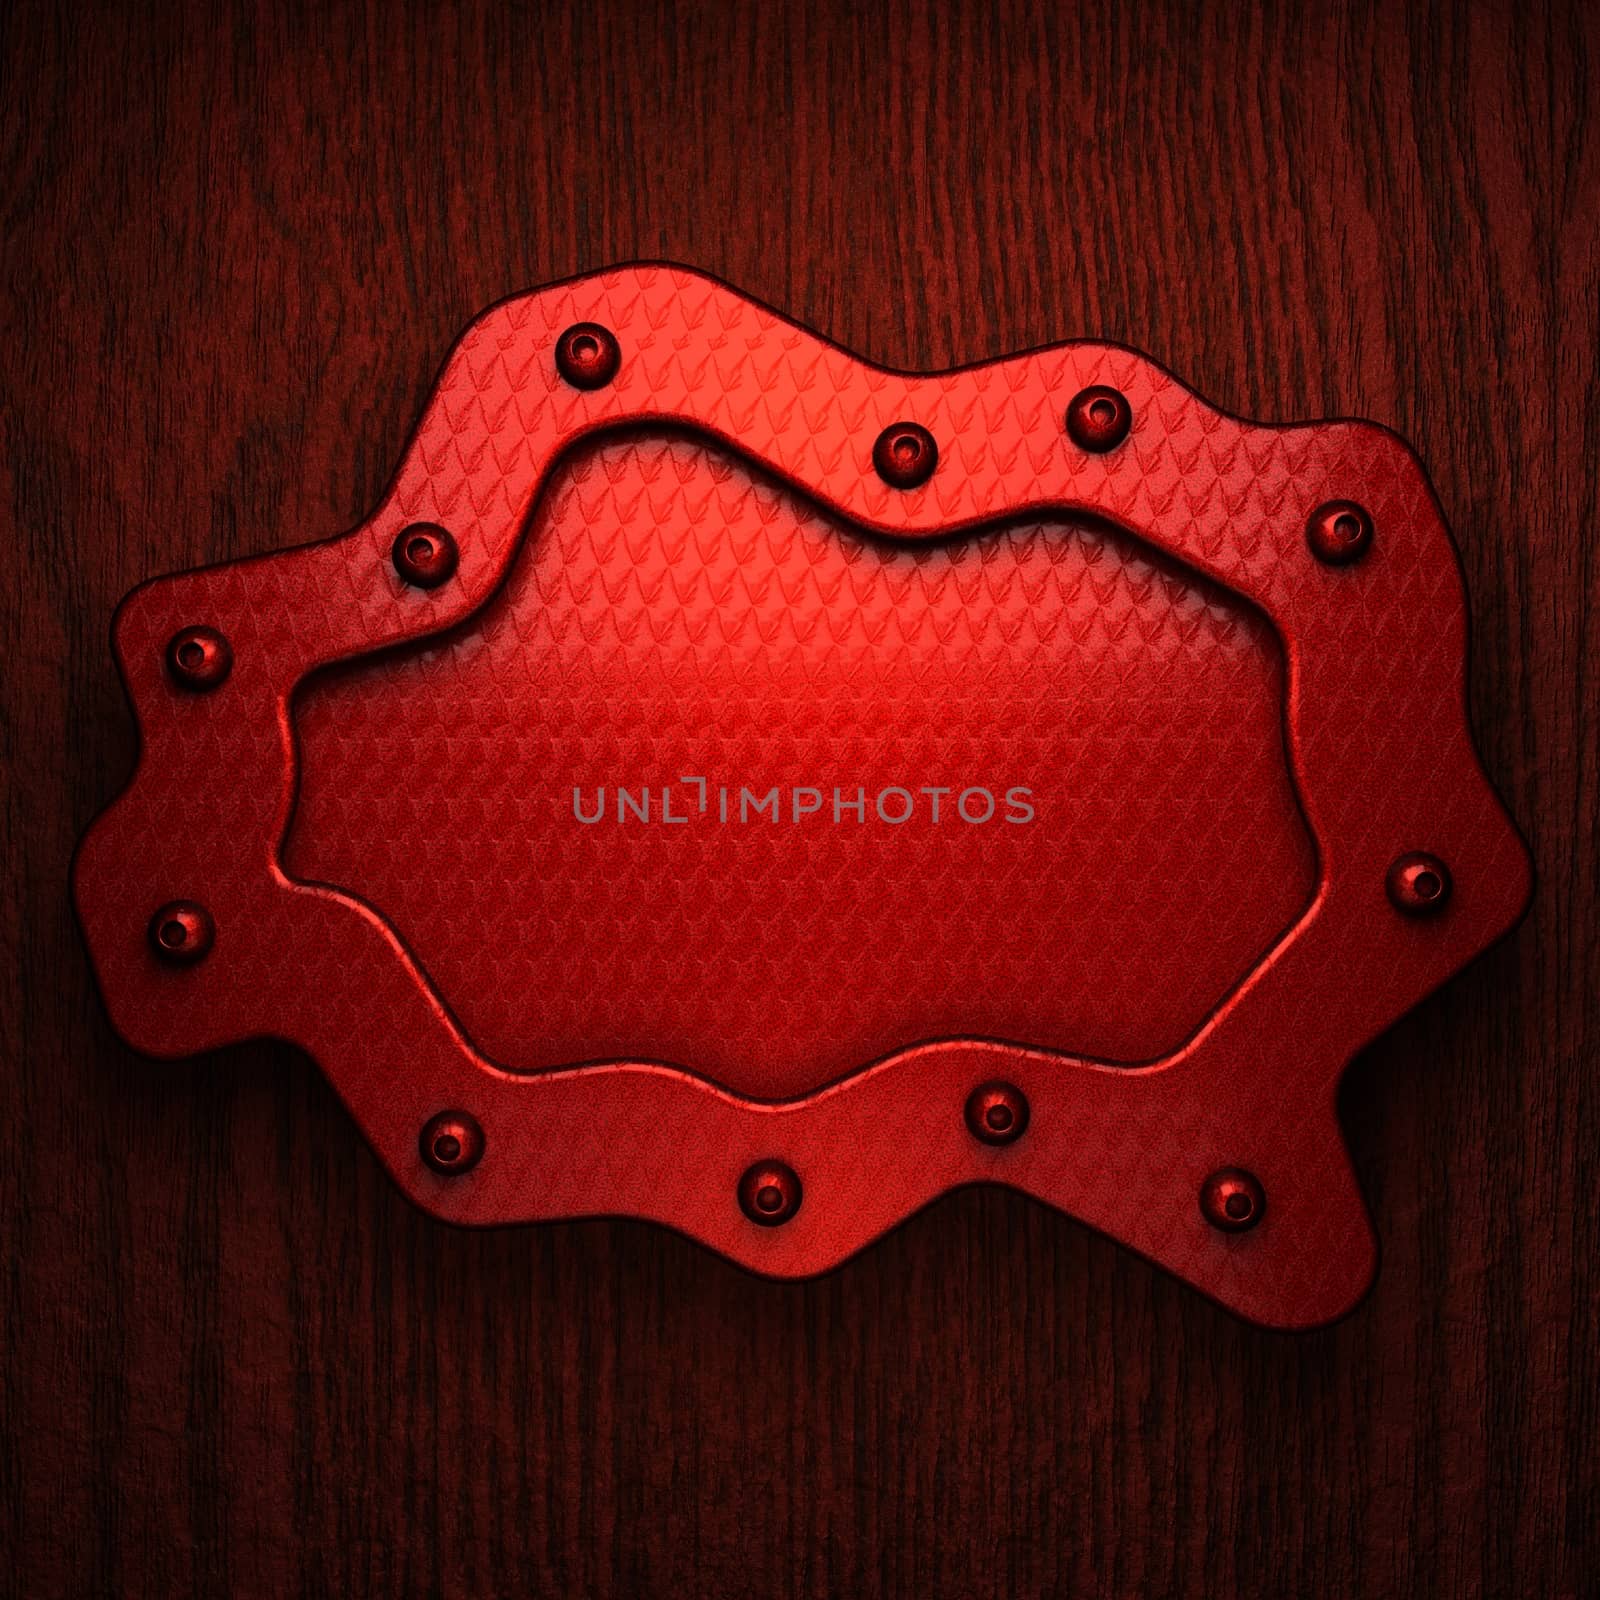 red pollished metal on wooden bachkround by videodoctor